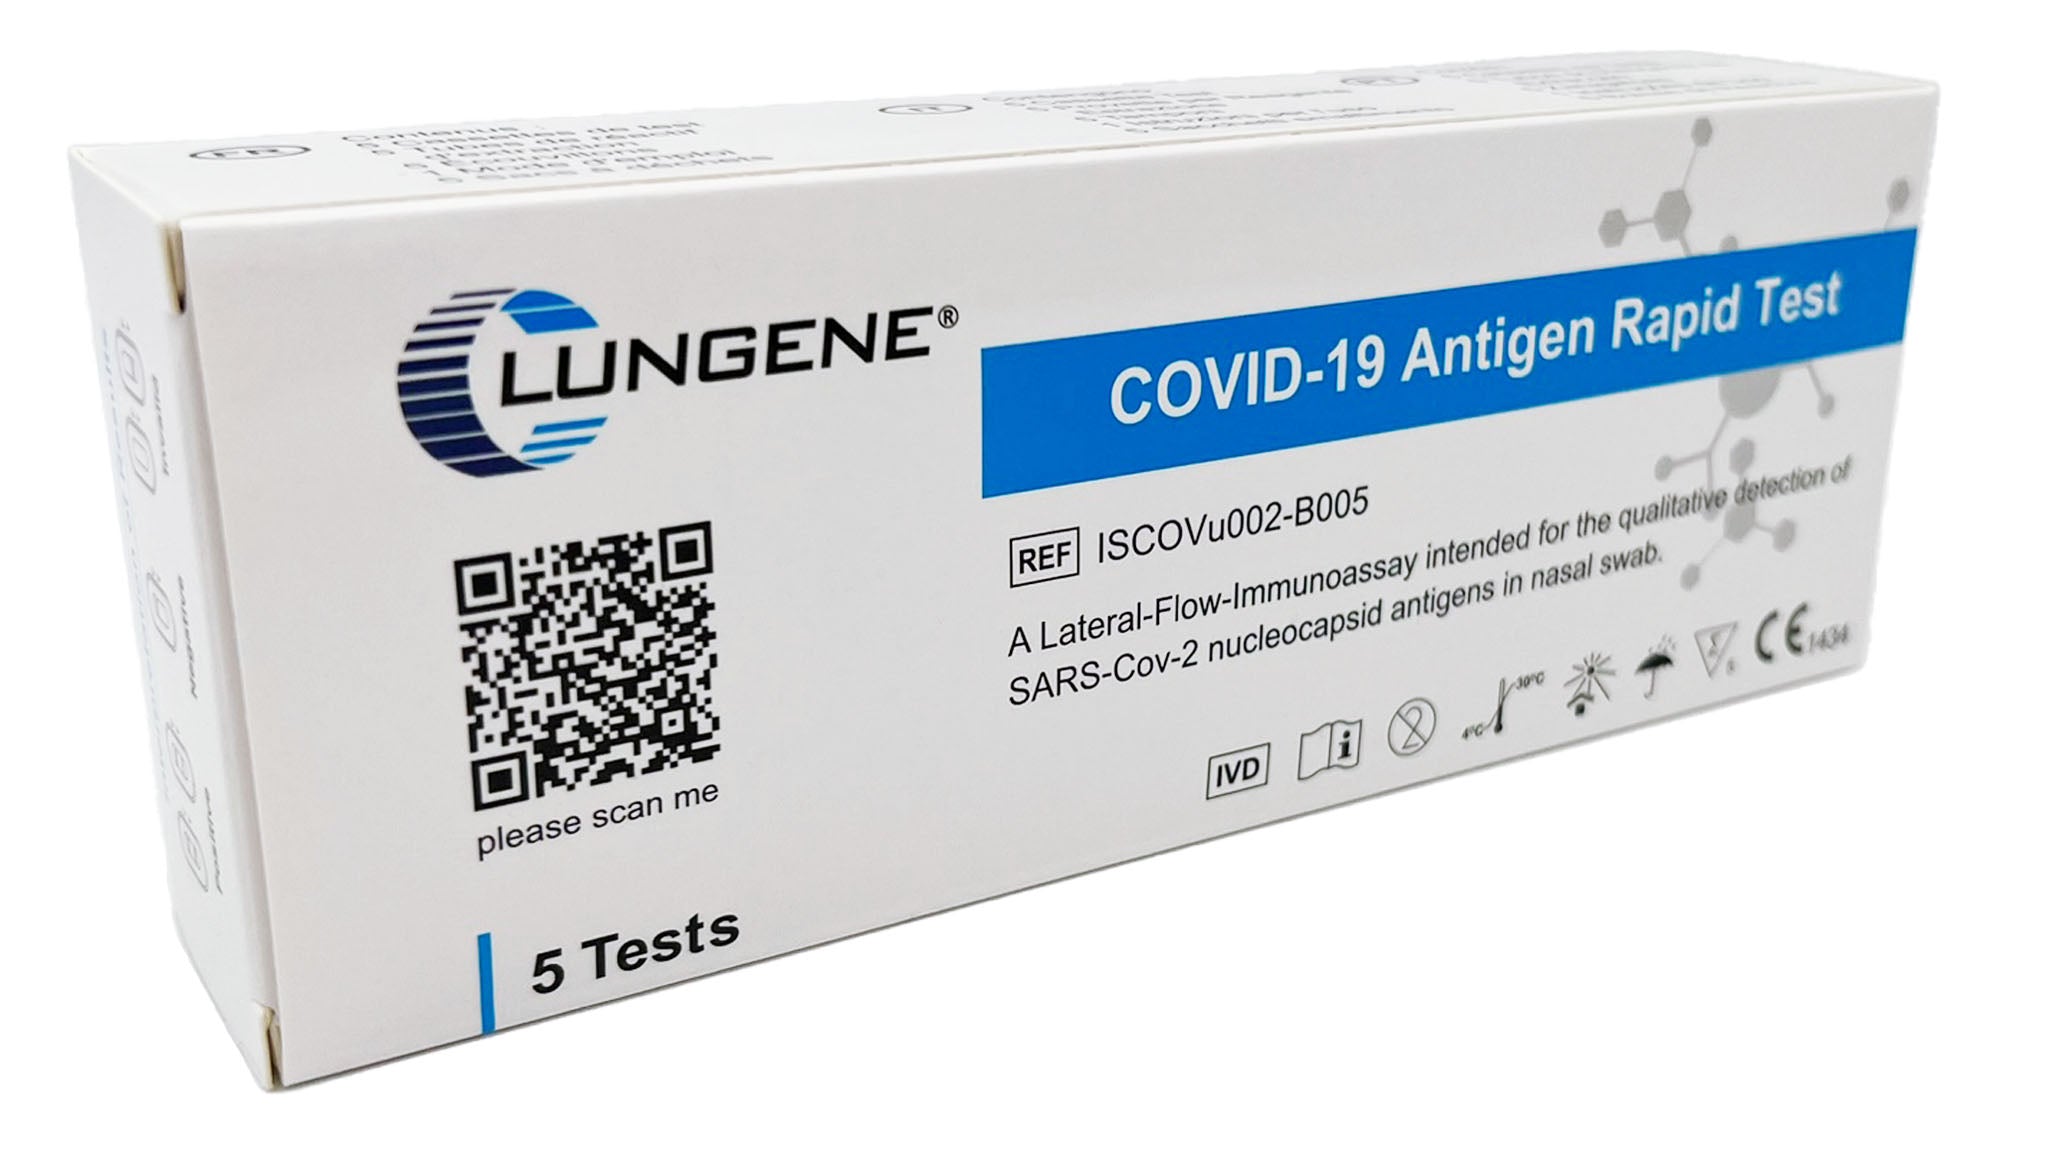 Clungene COVID-19 Selbst-/Laientest (5 Tests je Box)